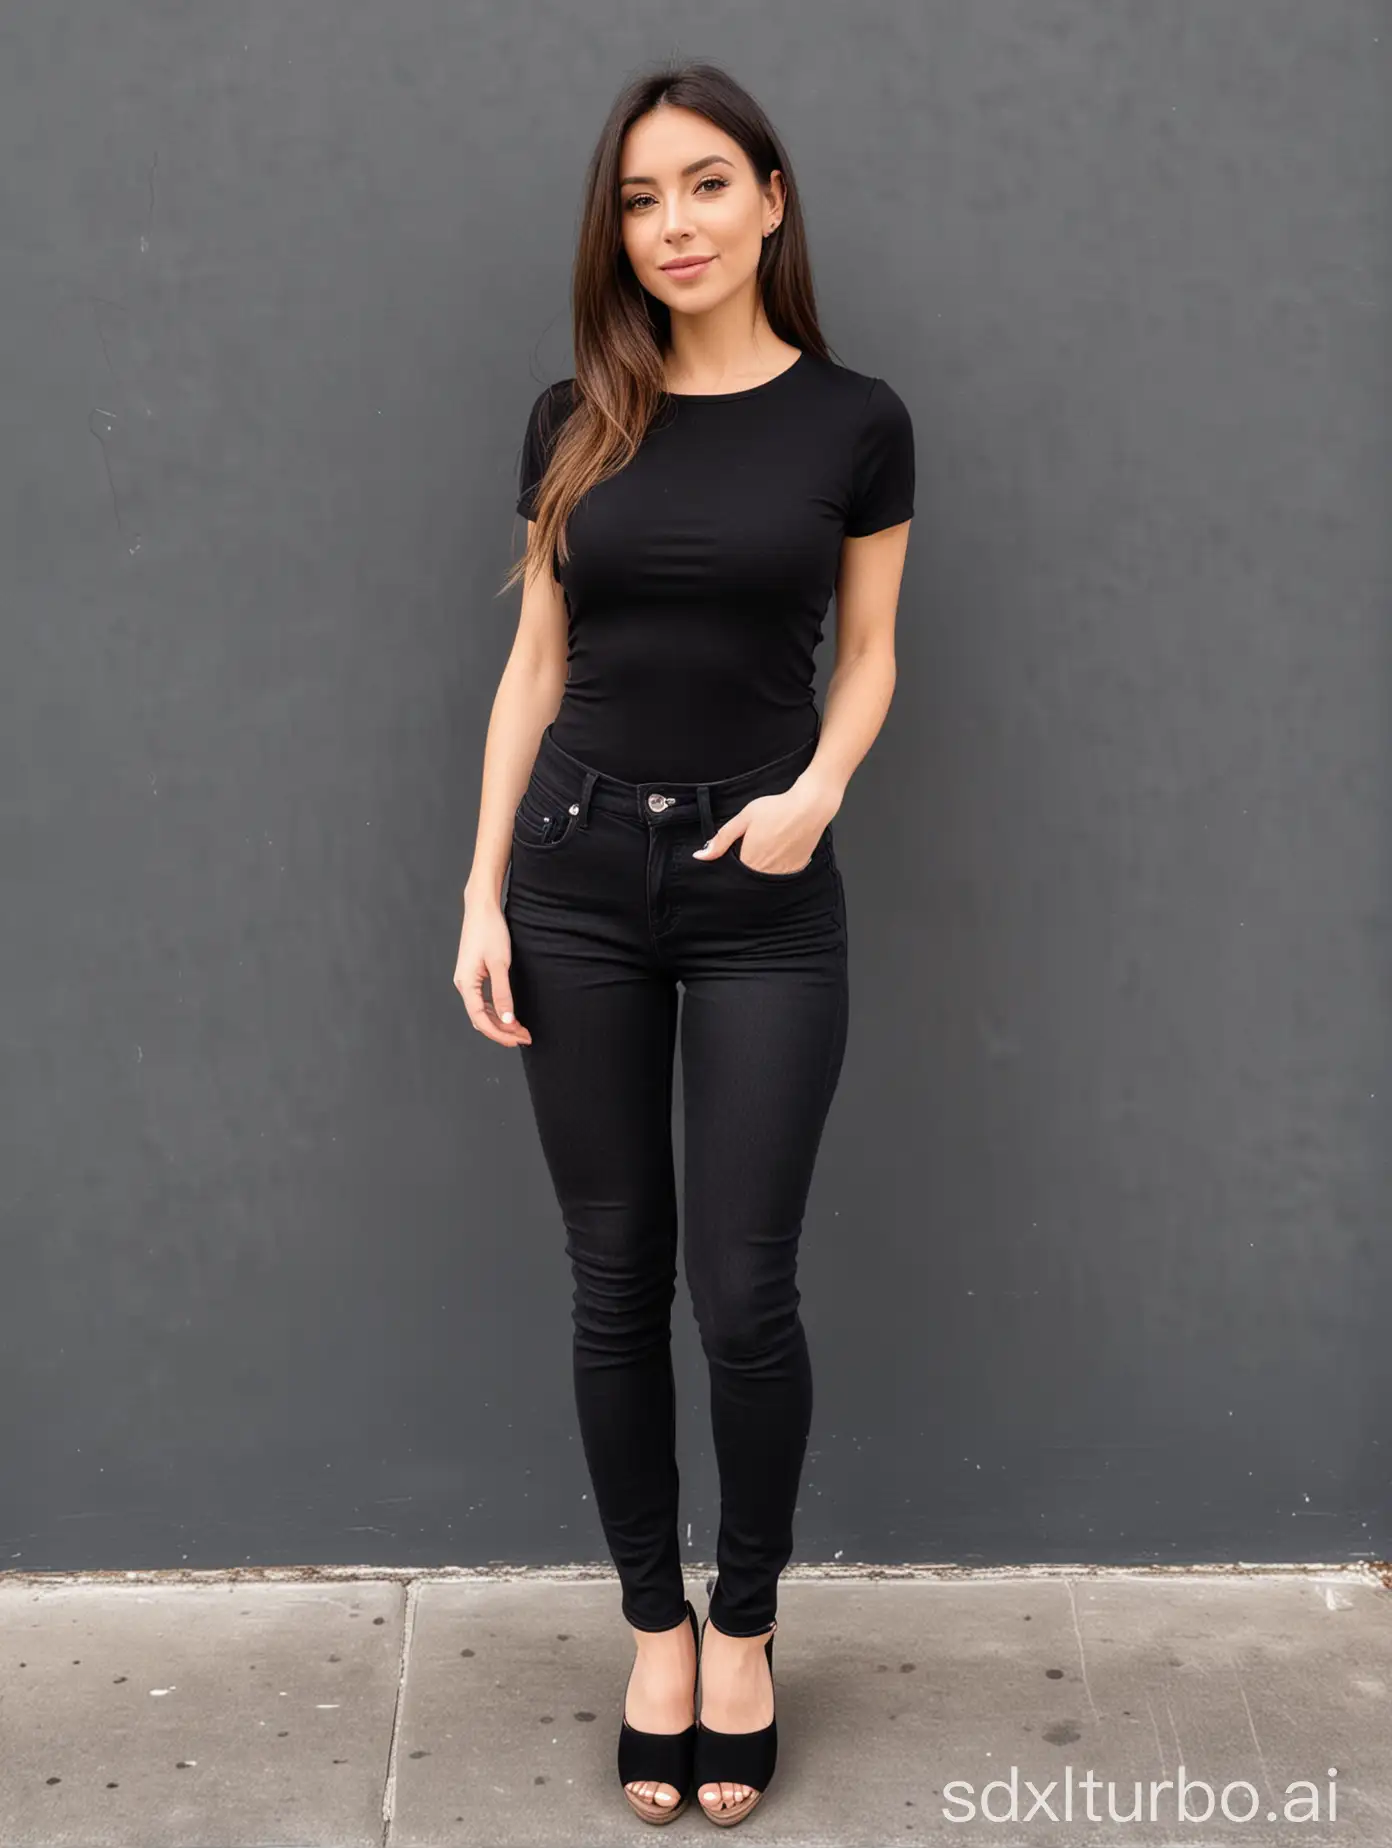 young petite woman with small body in black top and black skinny jeans